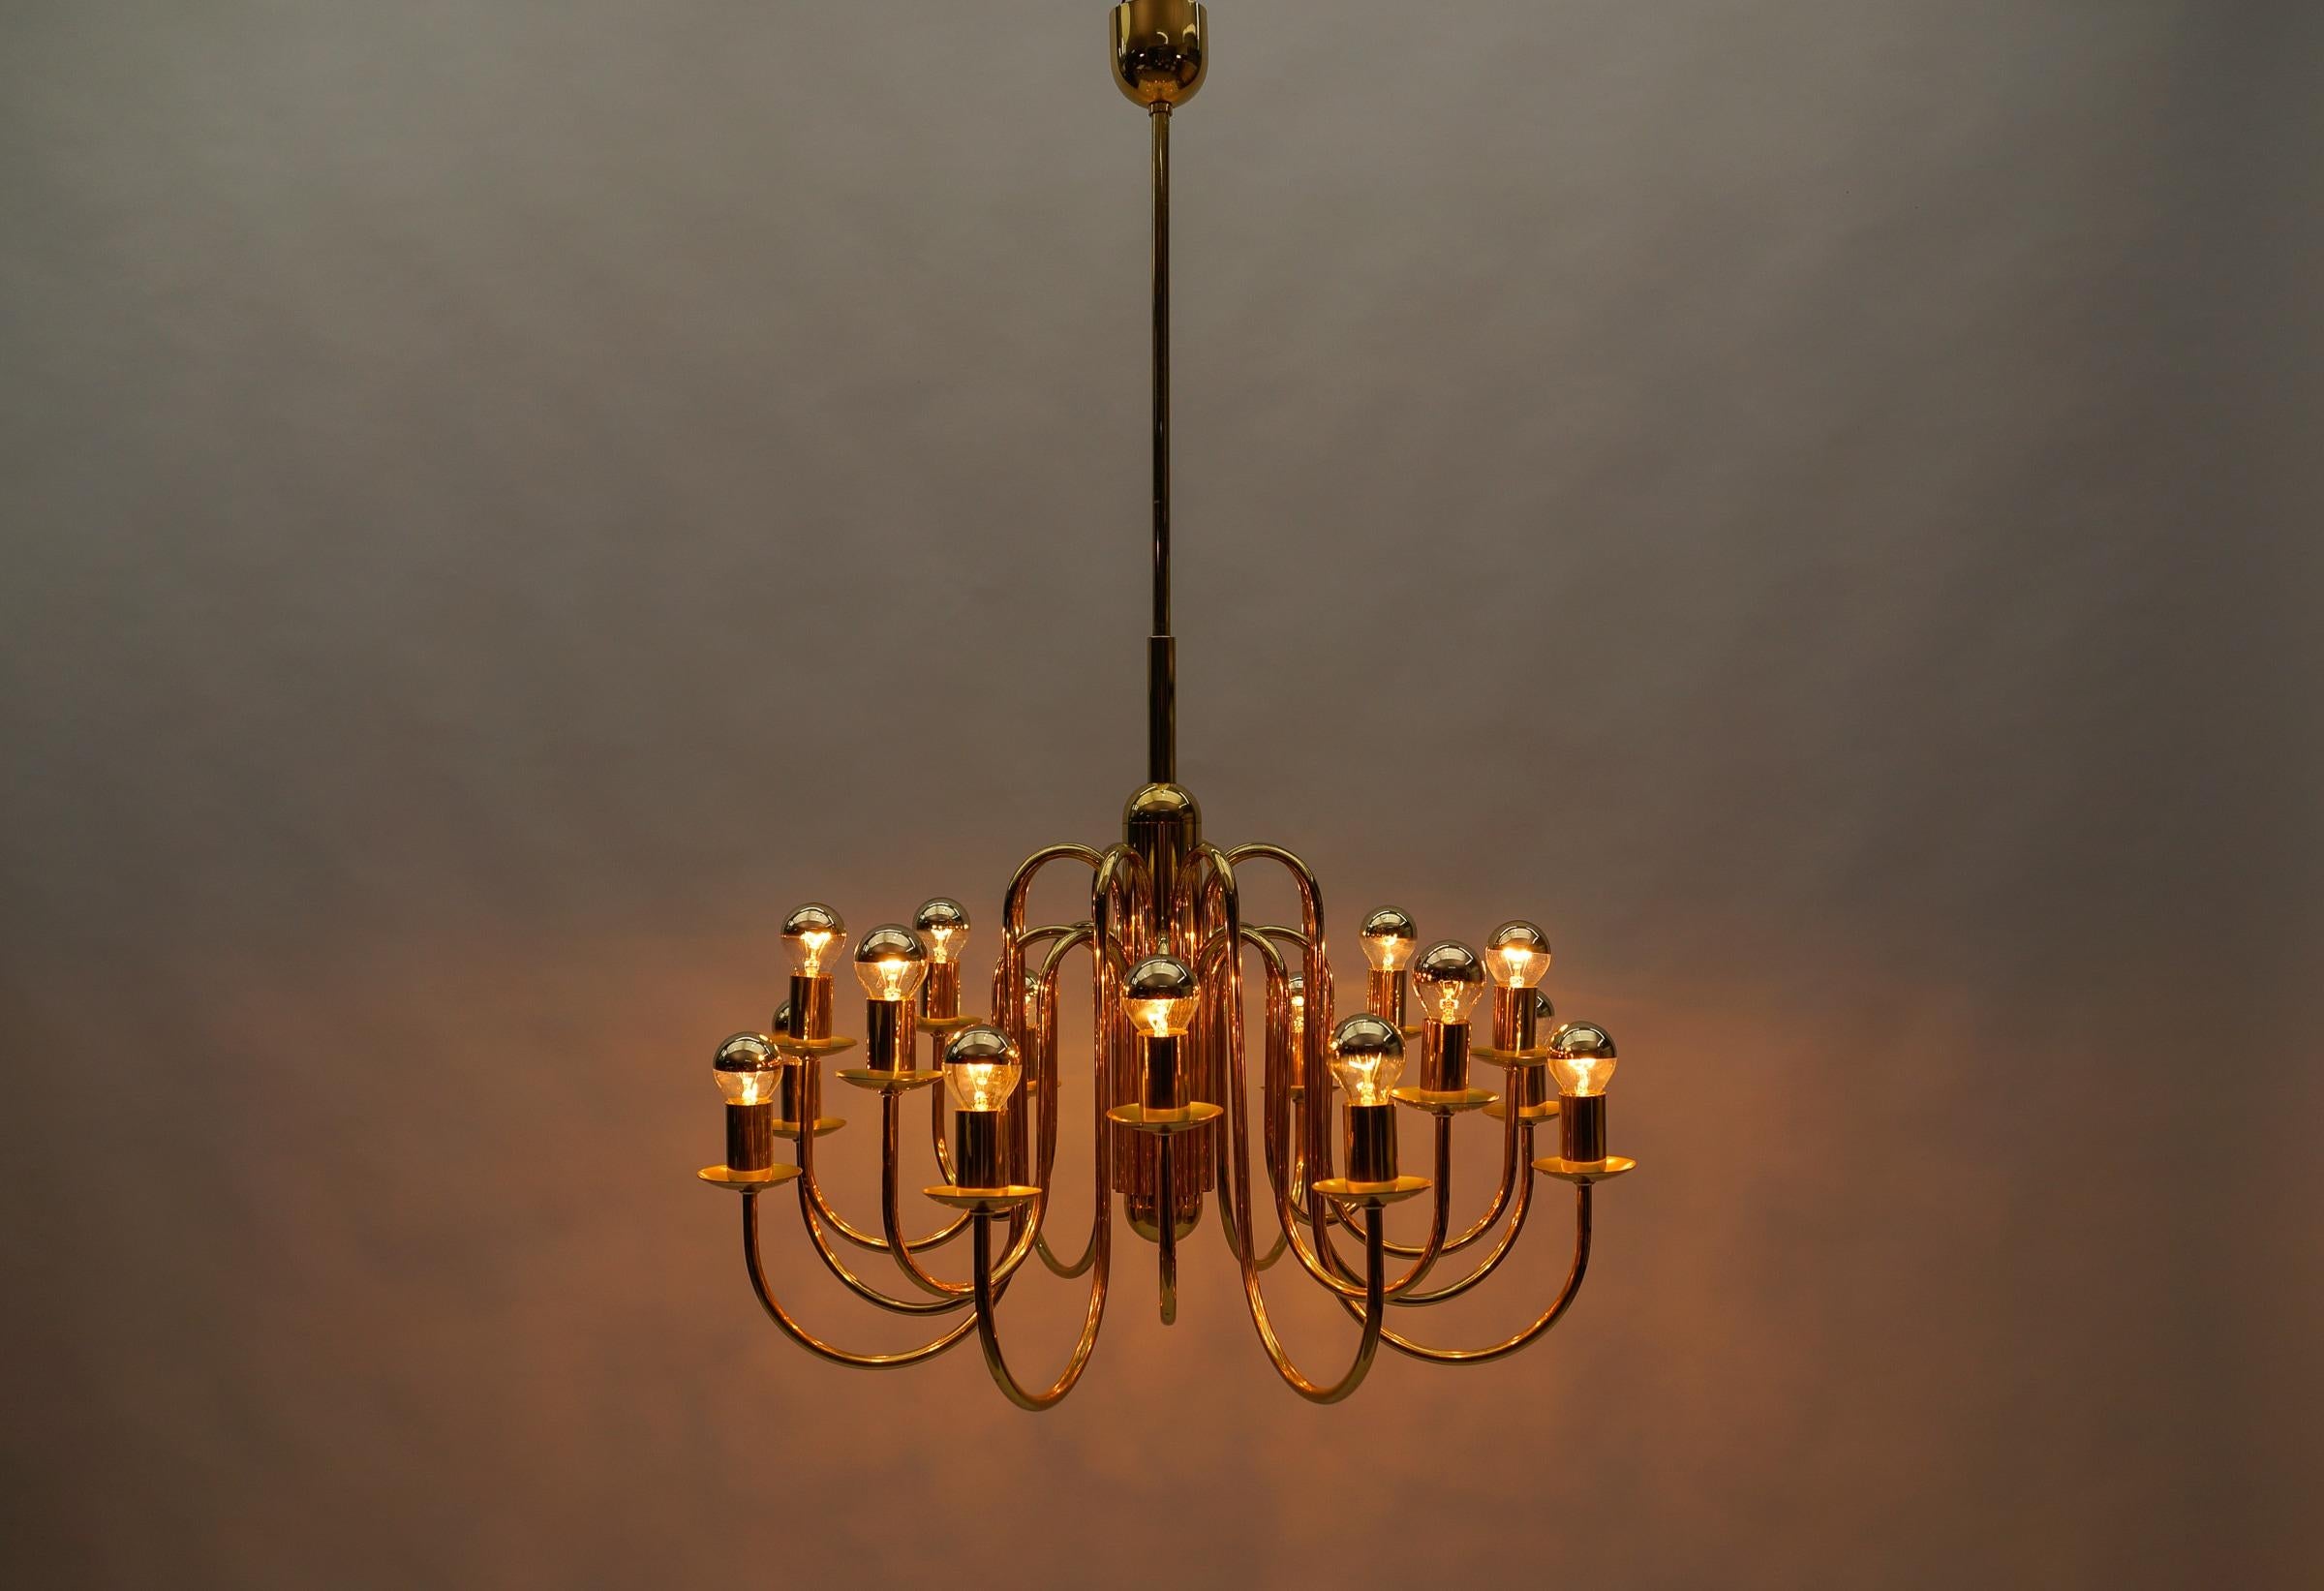 Lovely Elegant Mid-Century Modern Brass Chandelier Lamp, Italy 1970s


Executed in glass, metal and brass. The lamp needs 16 x E14 Edison screw fit bulb, is wired, in working condition and runs both on 110 / 230 volt.

Light bulbs are not